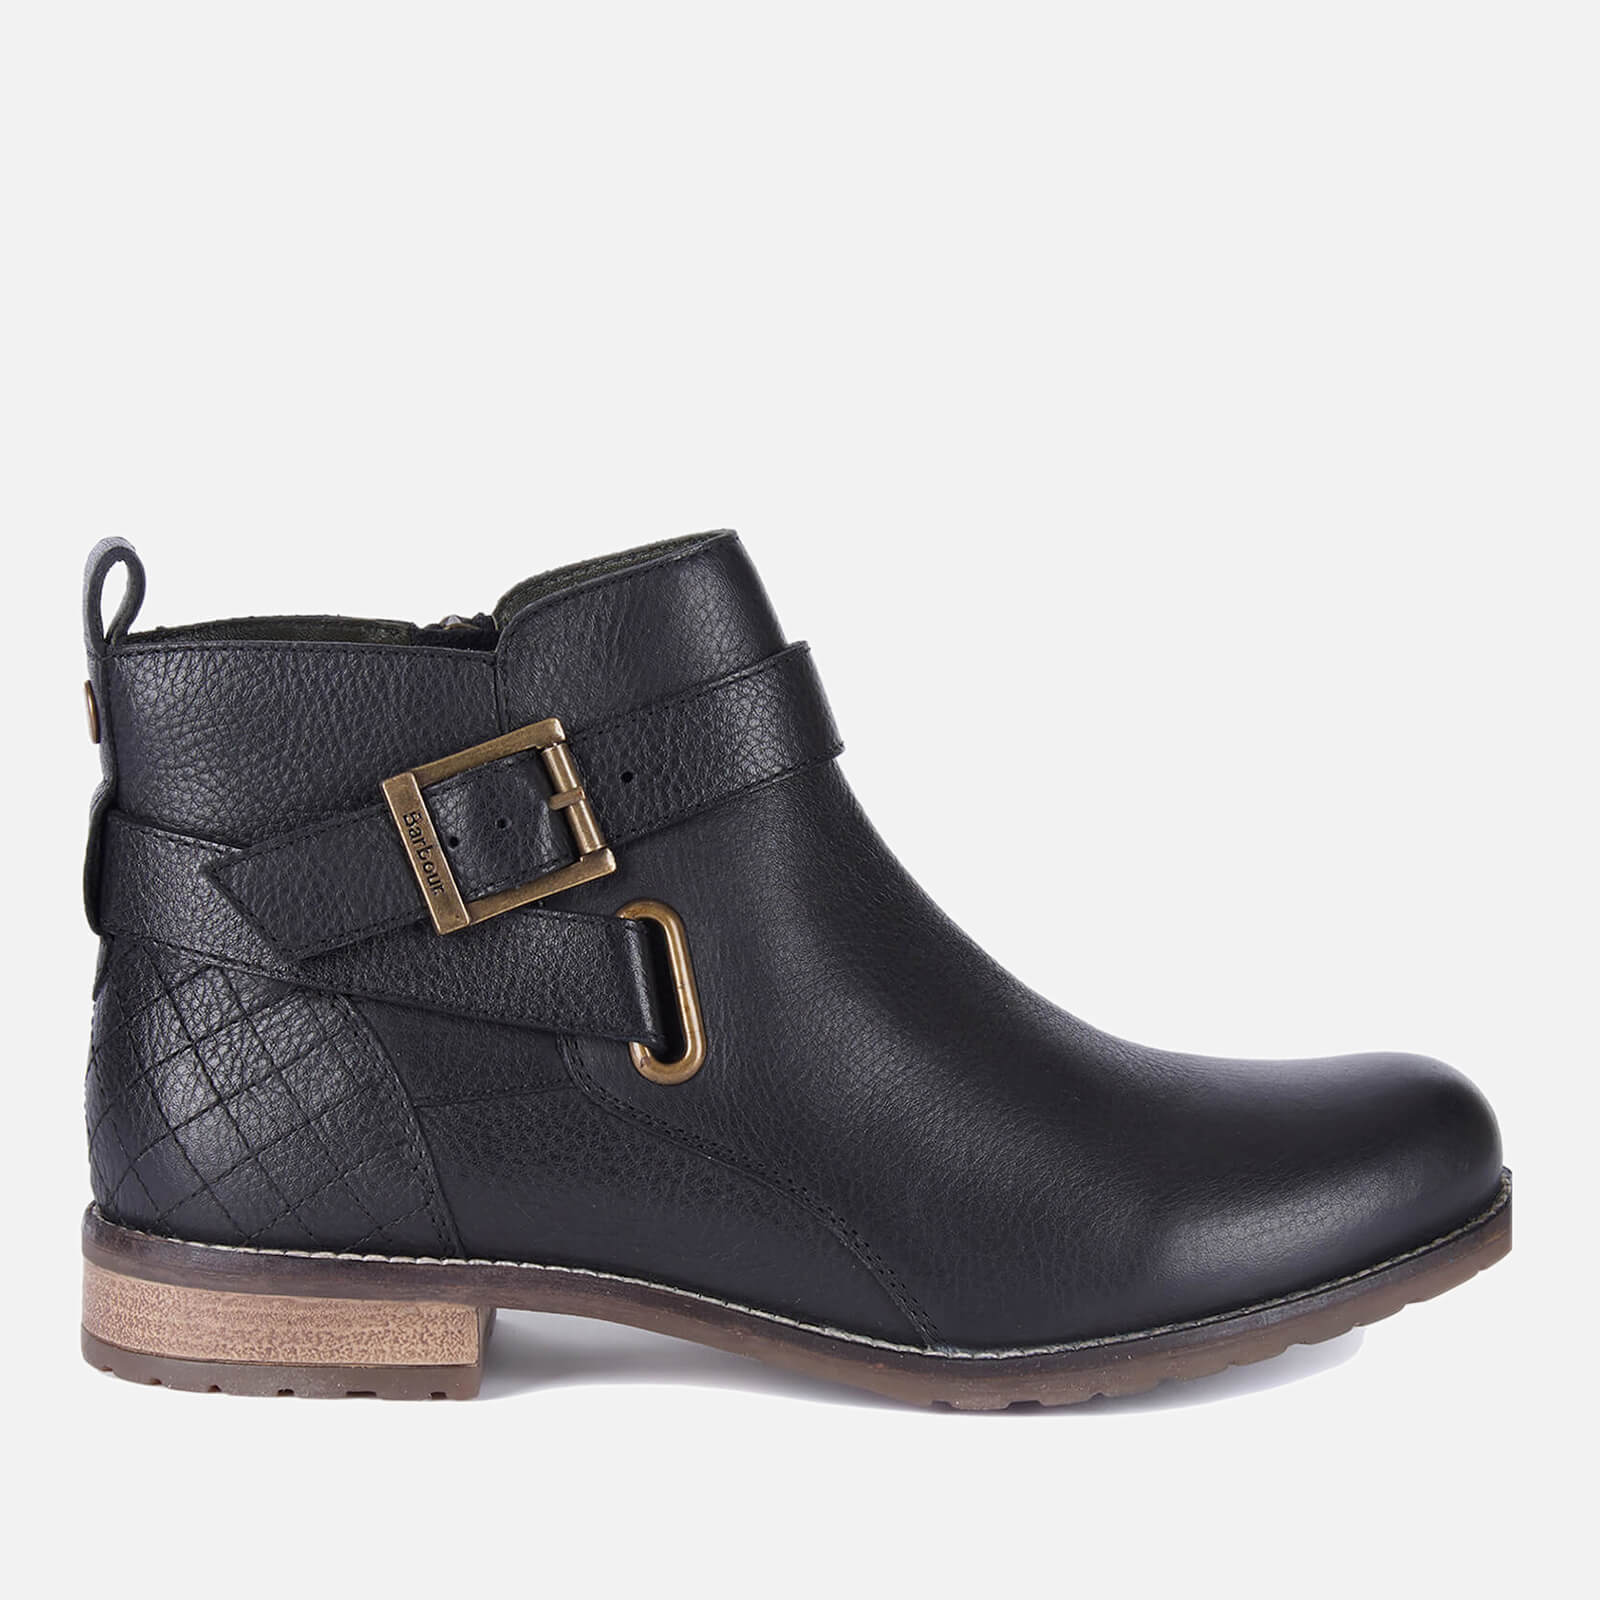 Barbour Women's Jane Ankle Boots - Black - UK 3 product